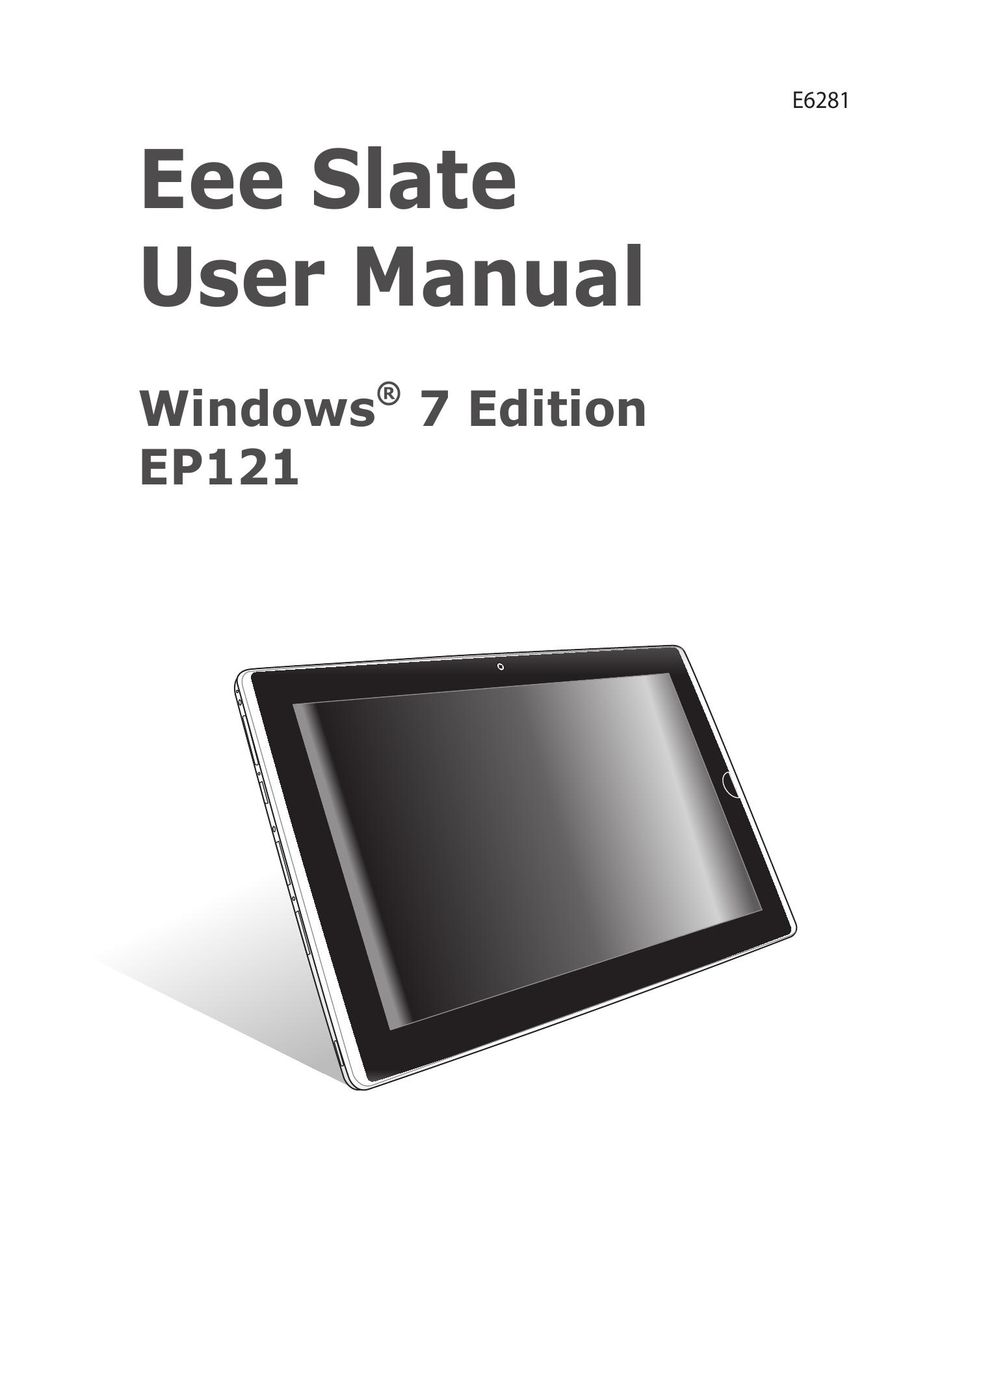 Asus EP121-1A009M Tablet User Manual